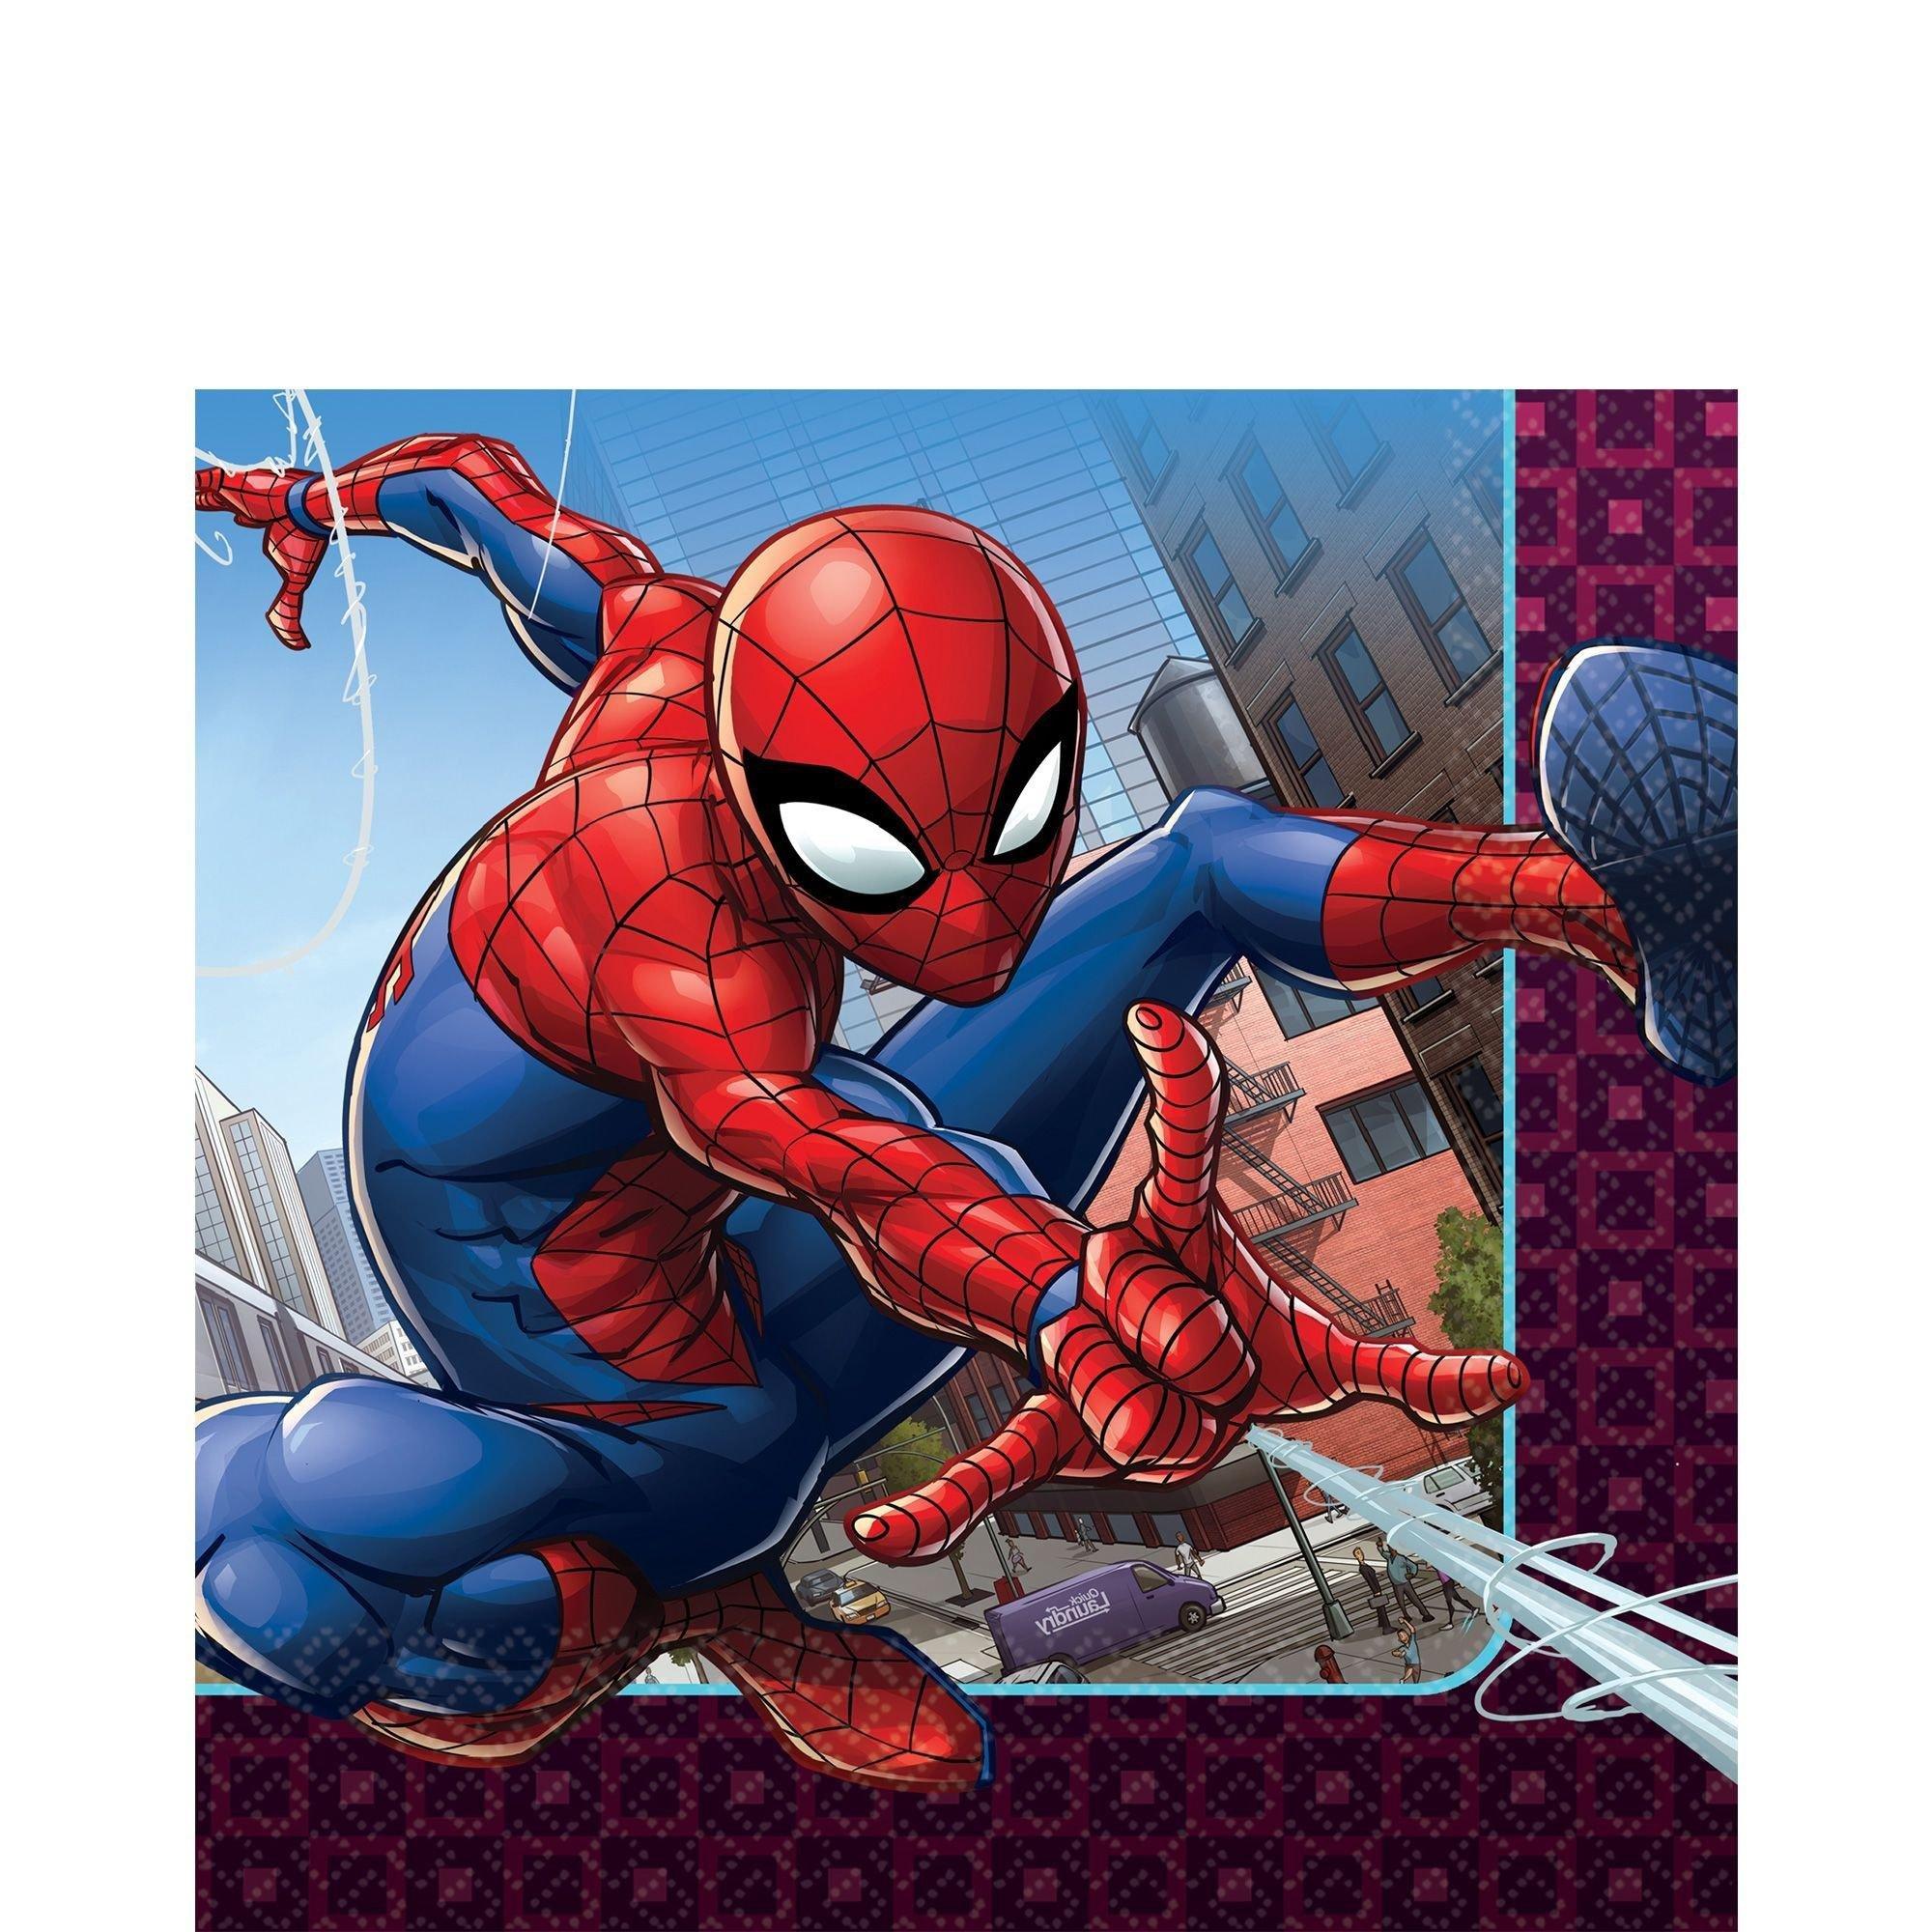 Spider-Man Webbed Wonder Party Supplies Pack for 8 Guests - Kit Includes Plates, Napkins & Table Cover